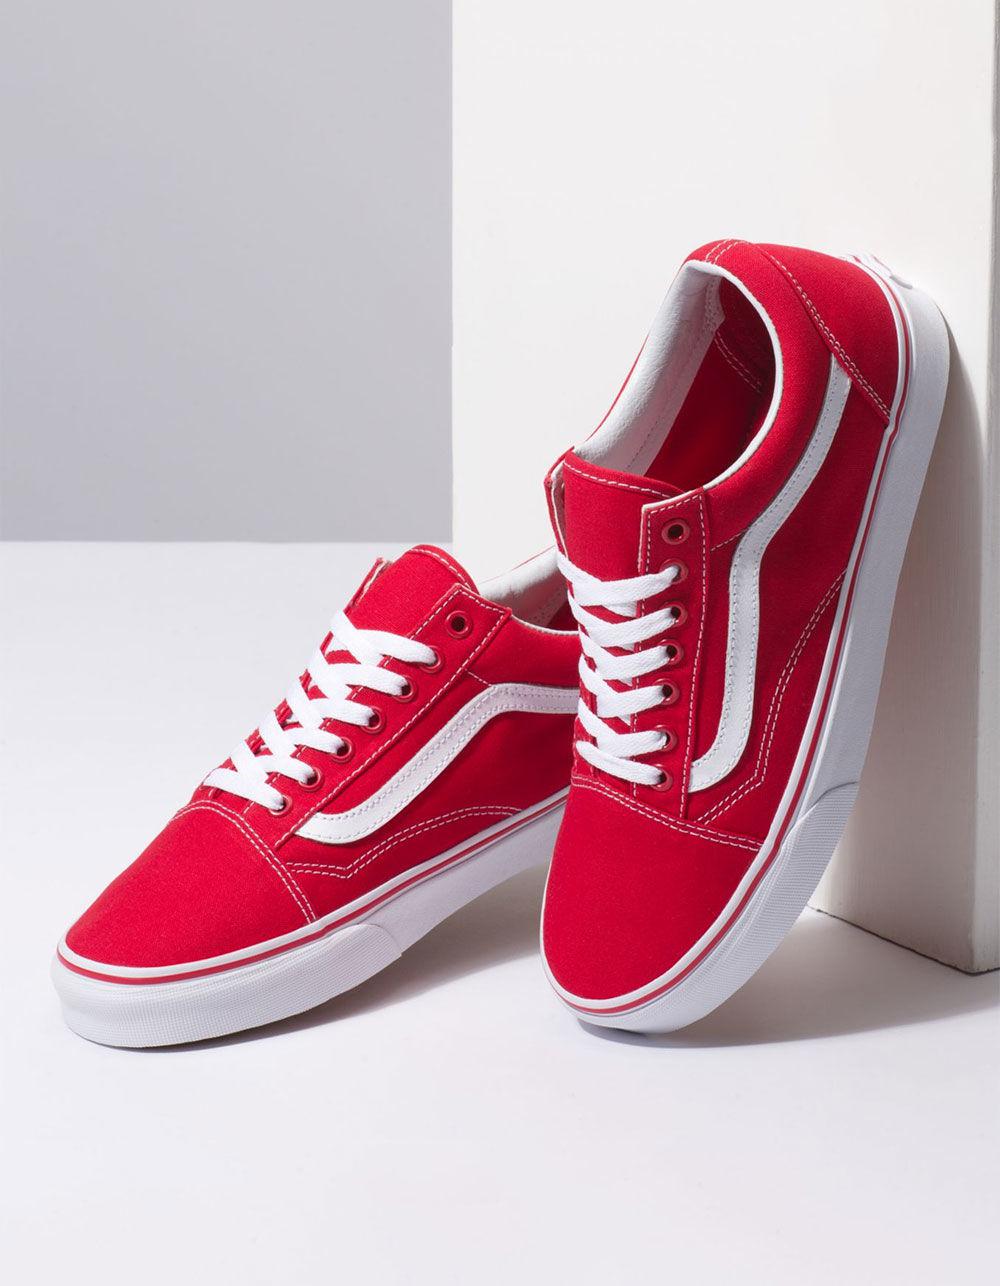 Vans Canvas Old Skool Formula One Shoes in Red - Lyst Red Vans Shoes For Girls